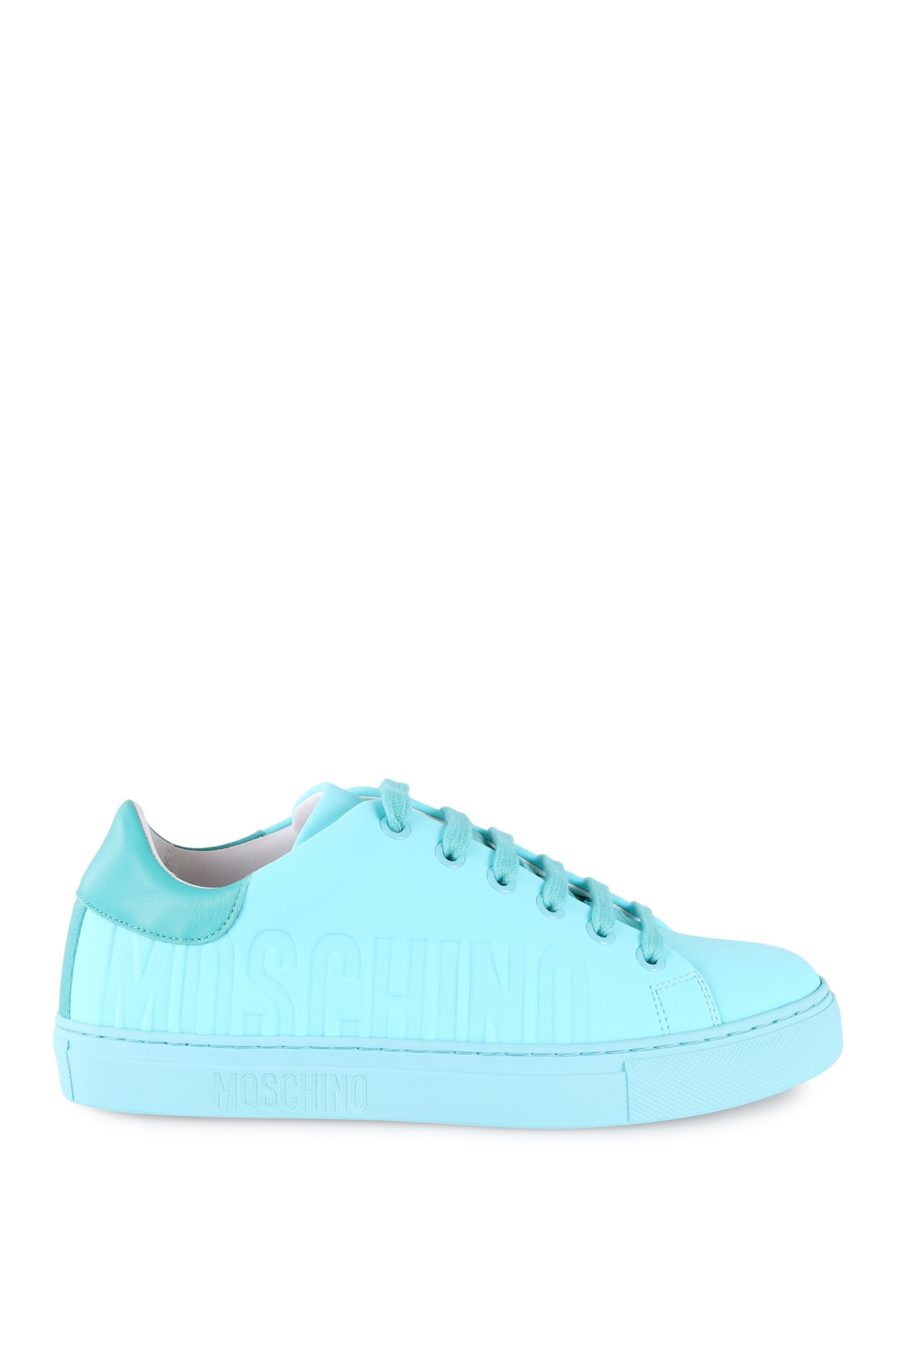 Trainers Moschino Couture in turquoise - ff4adea66ef4f72eaeb51c61f220ec20c1c398ab